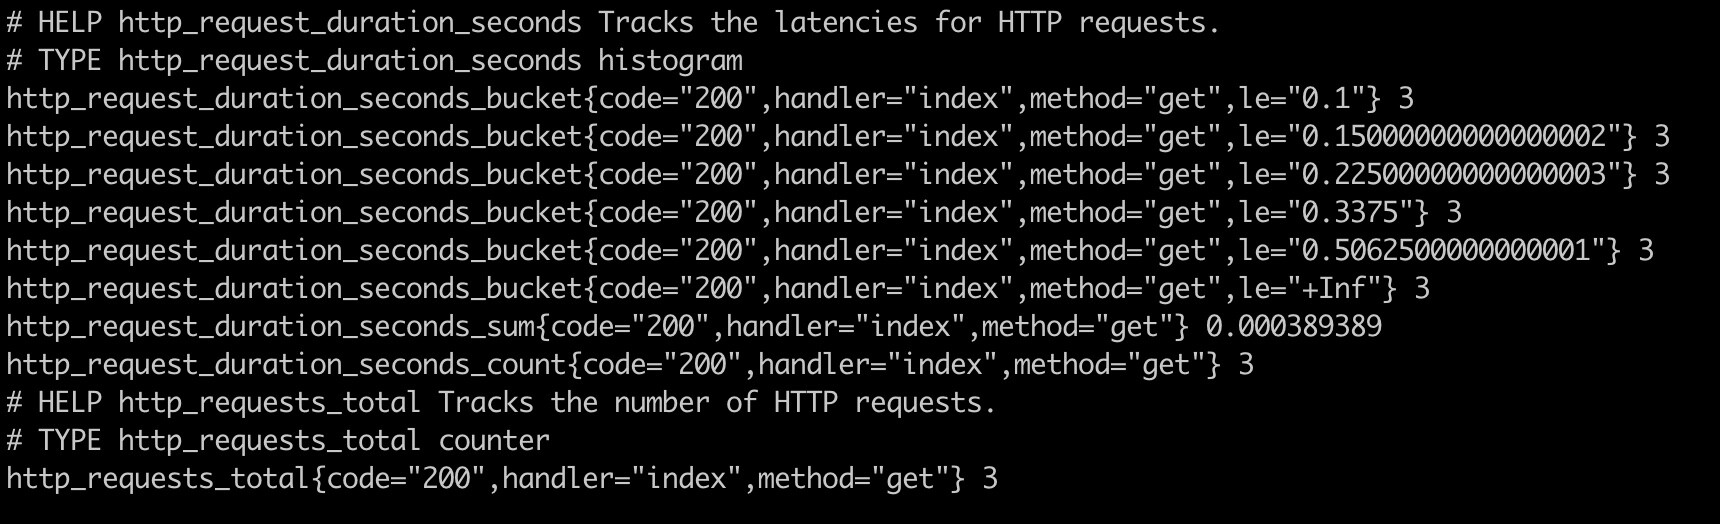 An extract of Prometheus metrics exposes by a web app